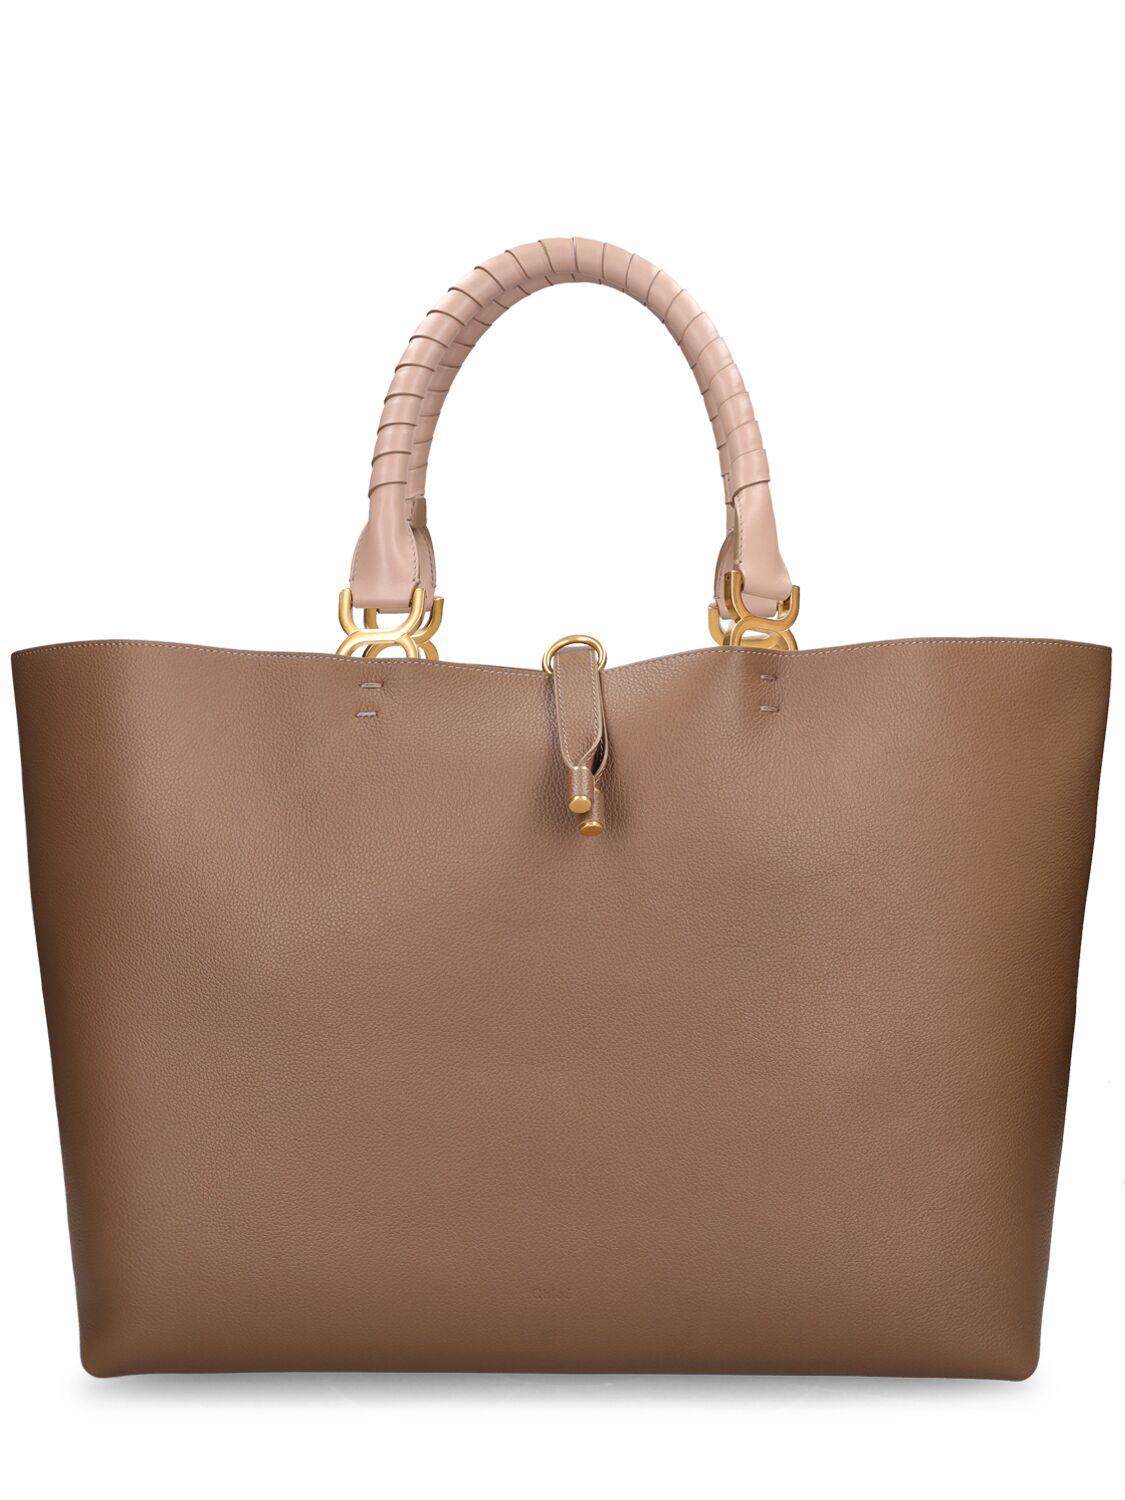 Image of Marcie Grained Leather Toe Bag